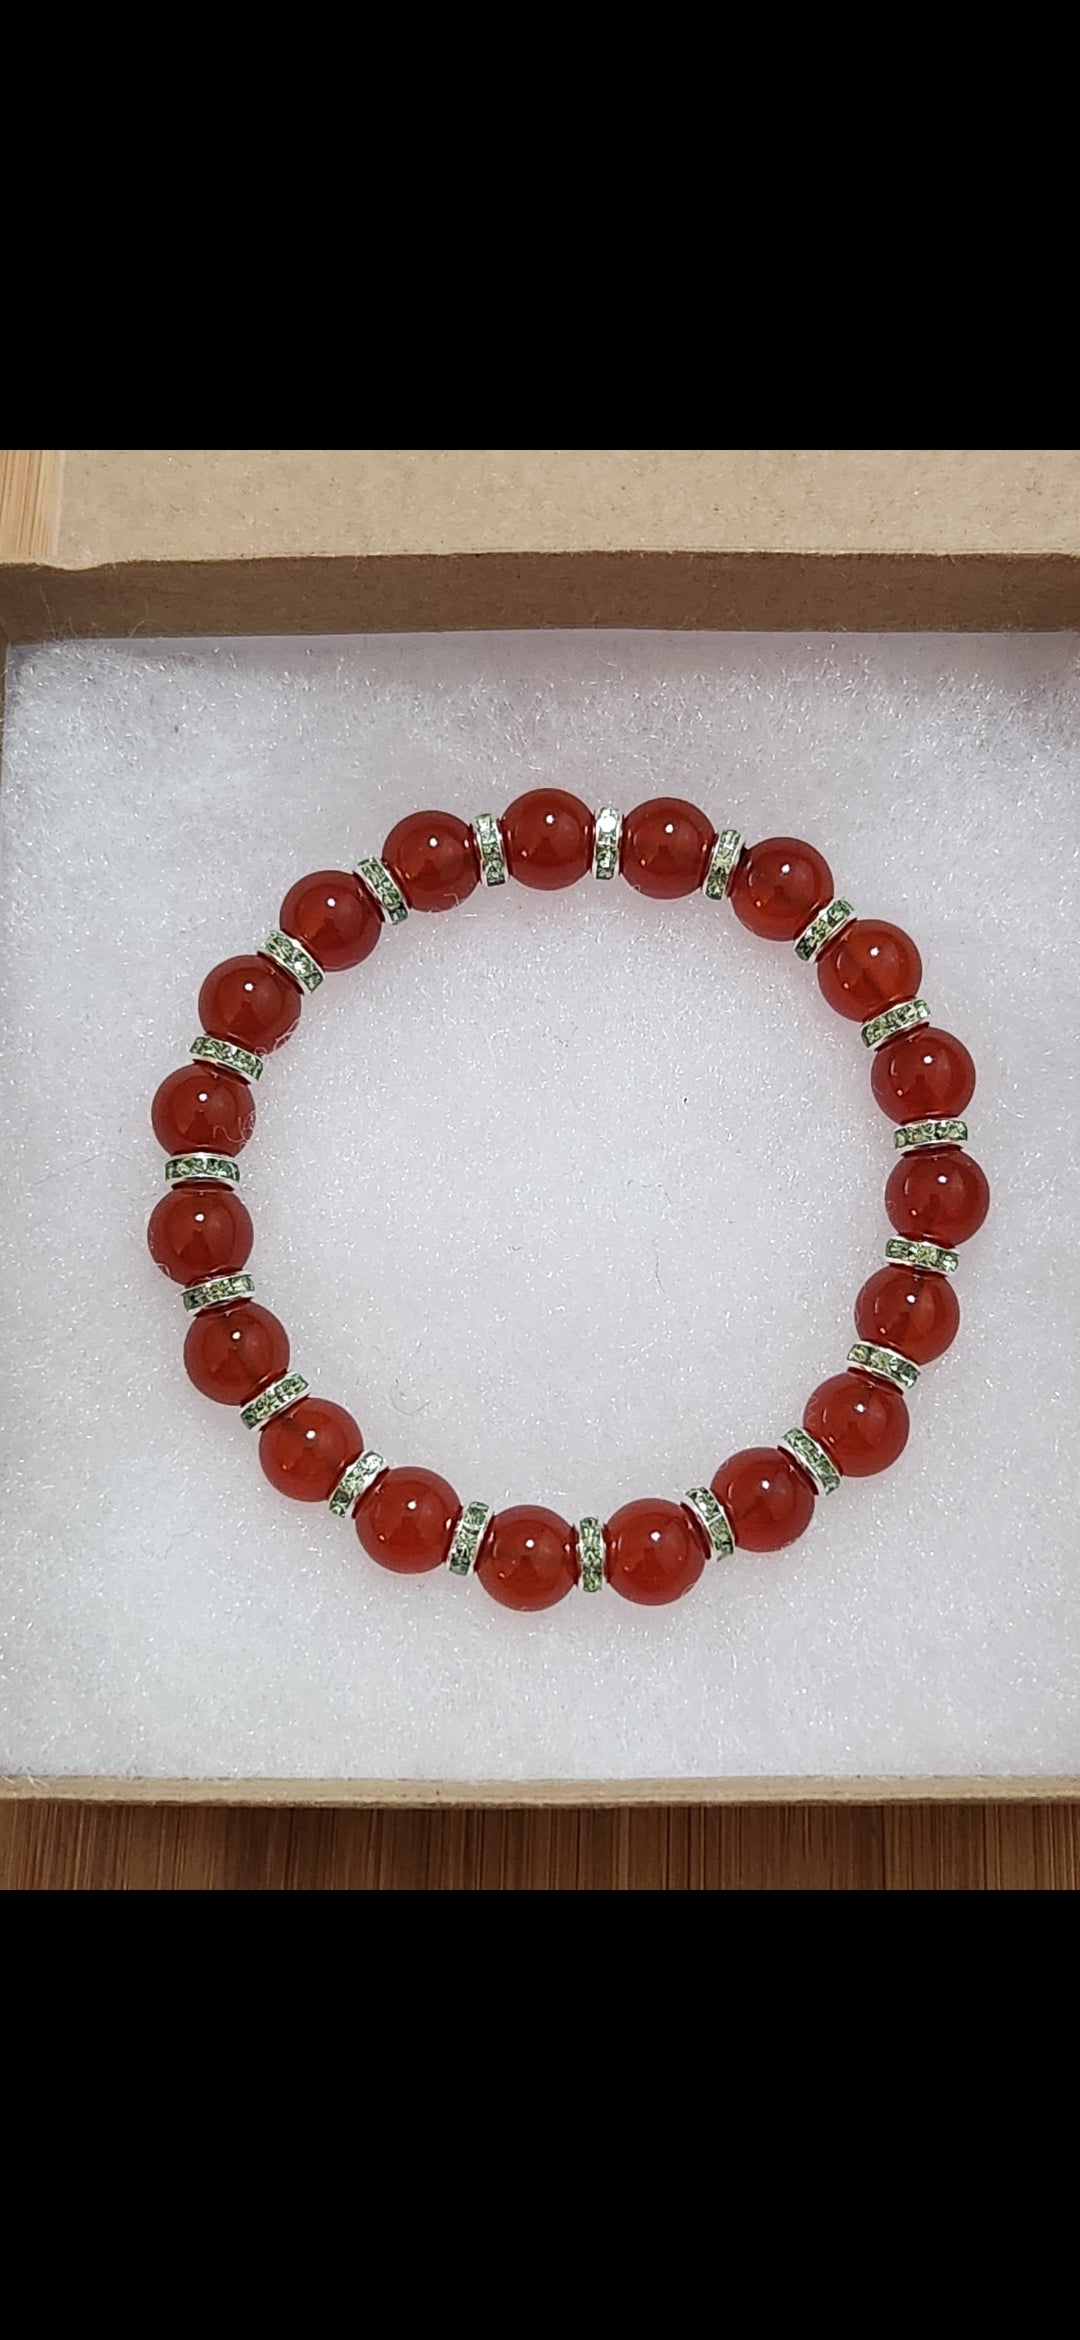 Carnelian Stone beaded bracelet with accents - strength - courage - bravery - vibrancy - life